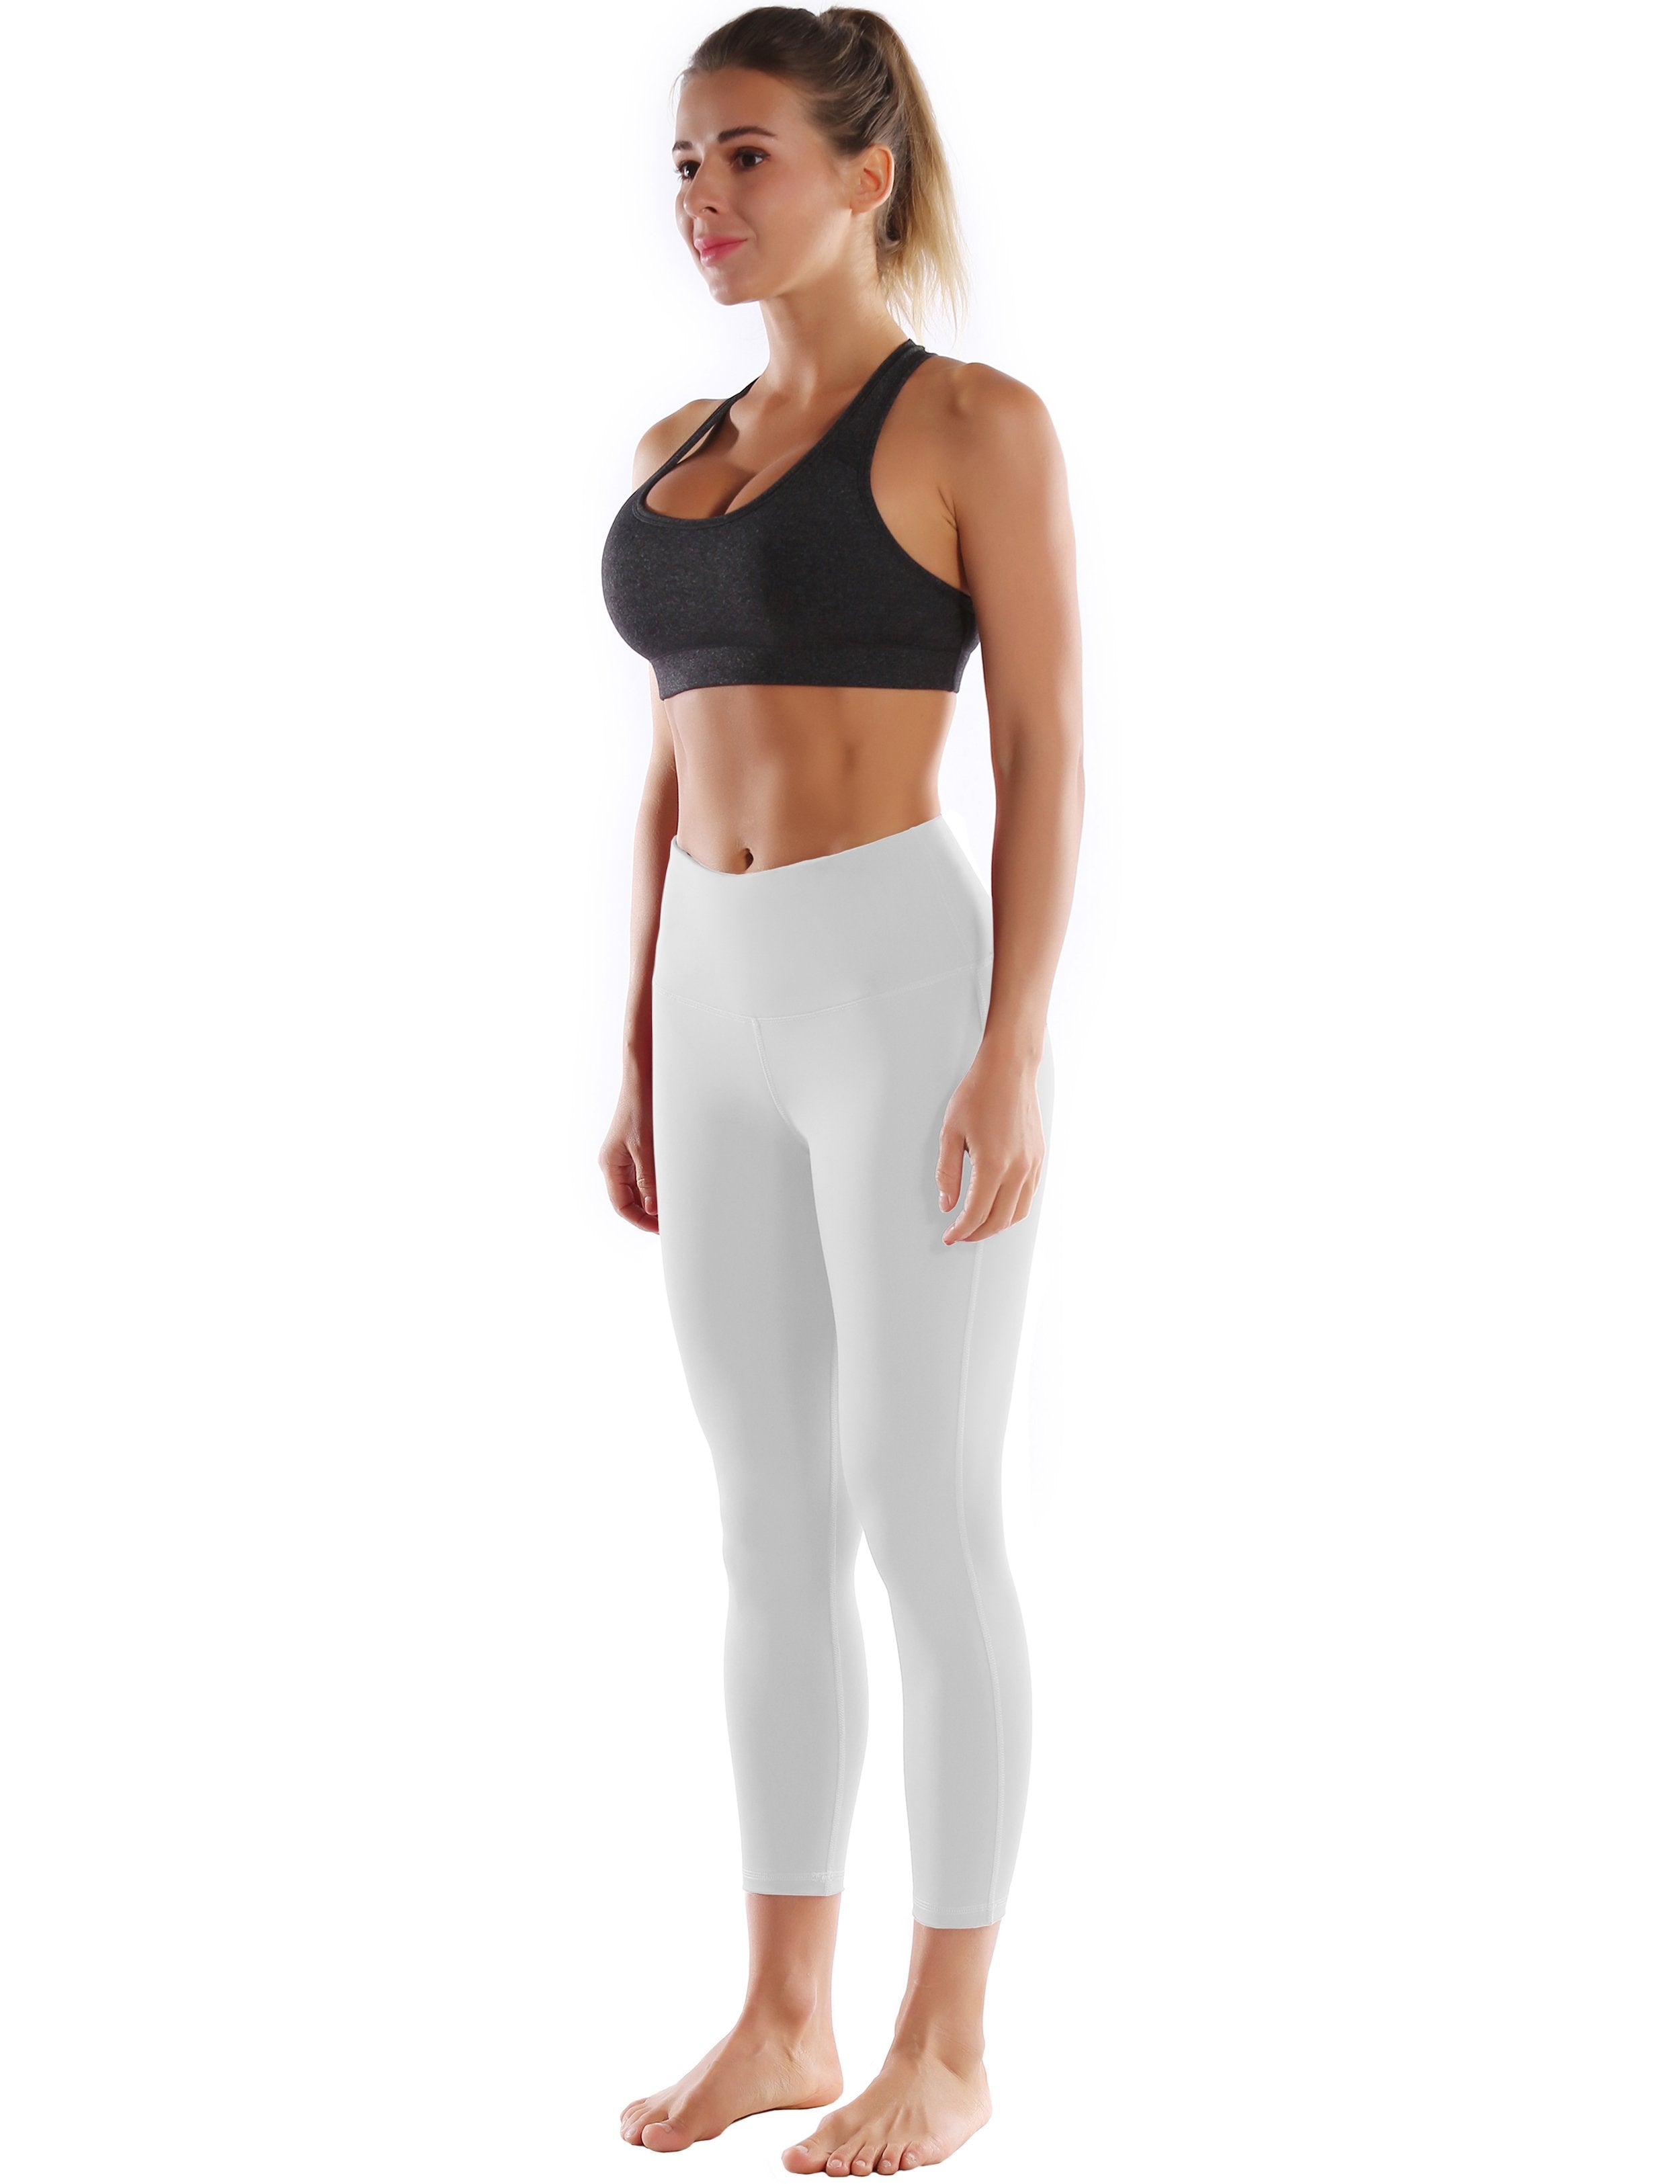 22" High Waist Side Line Capris lightgray 75%Nylon/25%Spandex Fabric doesn't attract lint easily 4-way stretch No see-through Moisture-wicking Tummy control Inner pocket